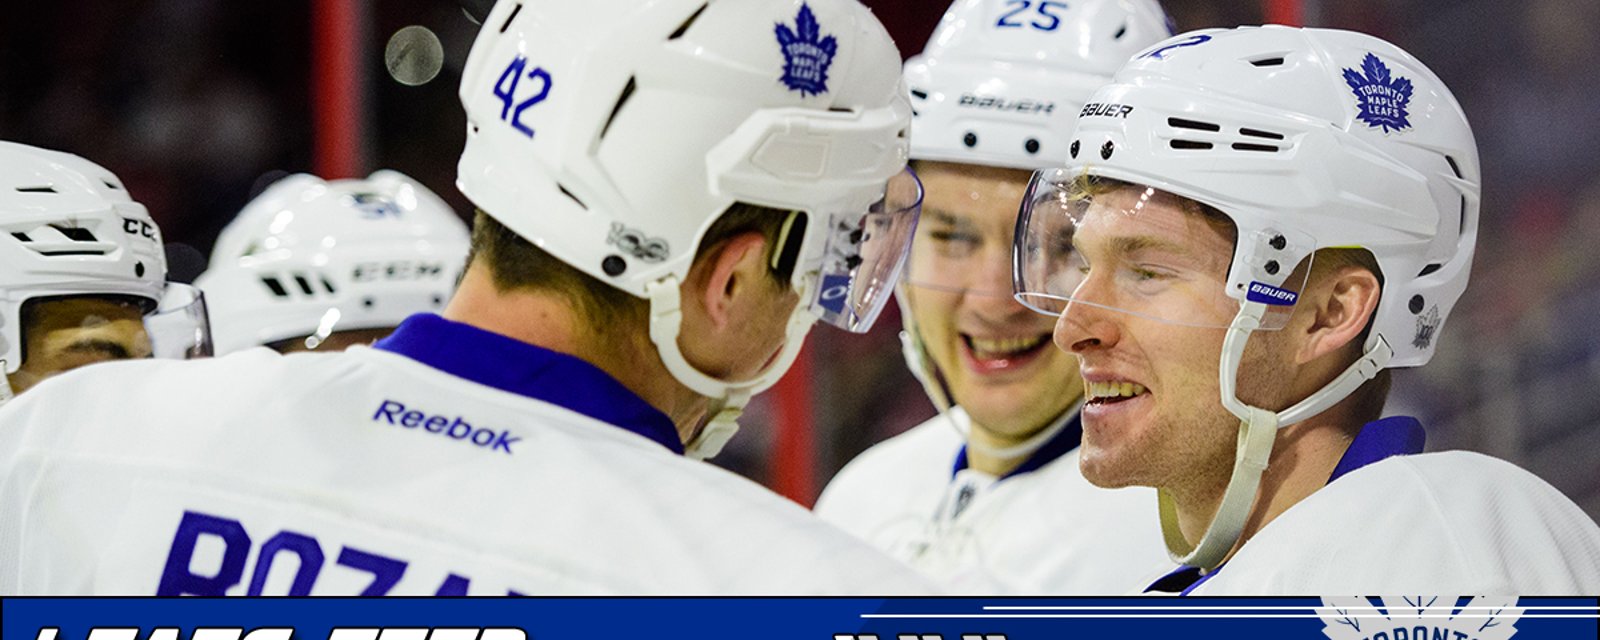 Leafs talk: What should the Leafs do ahead of the trade deadline? 